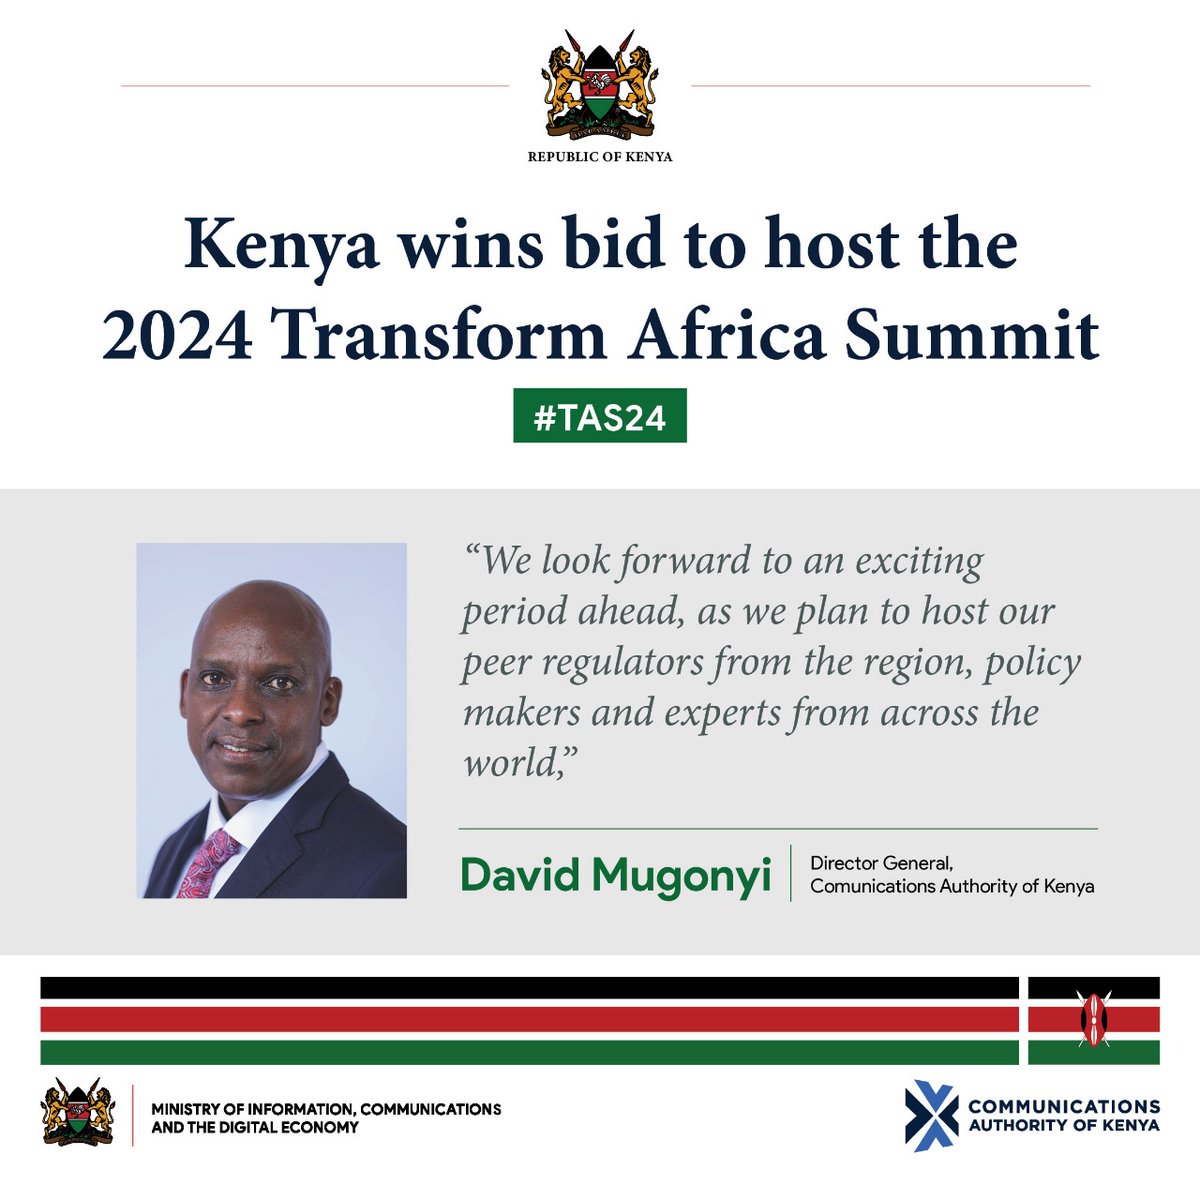 Also, this is the first time the event will be held in Kenya in the 10 year history of the Smart Africa Alliance. @CA_Kenya DG Mr. David Mugonyi says the Authority will use the event to interact and share best practices with peers from the region to address emerging challenges…